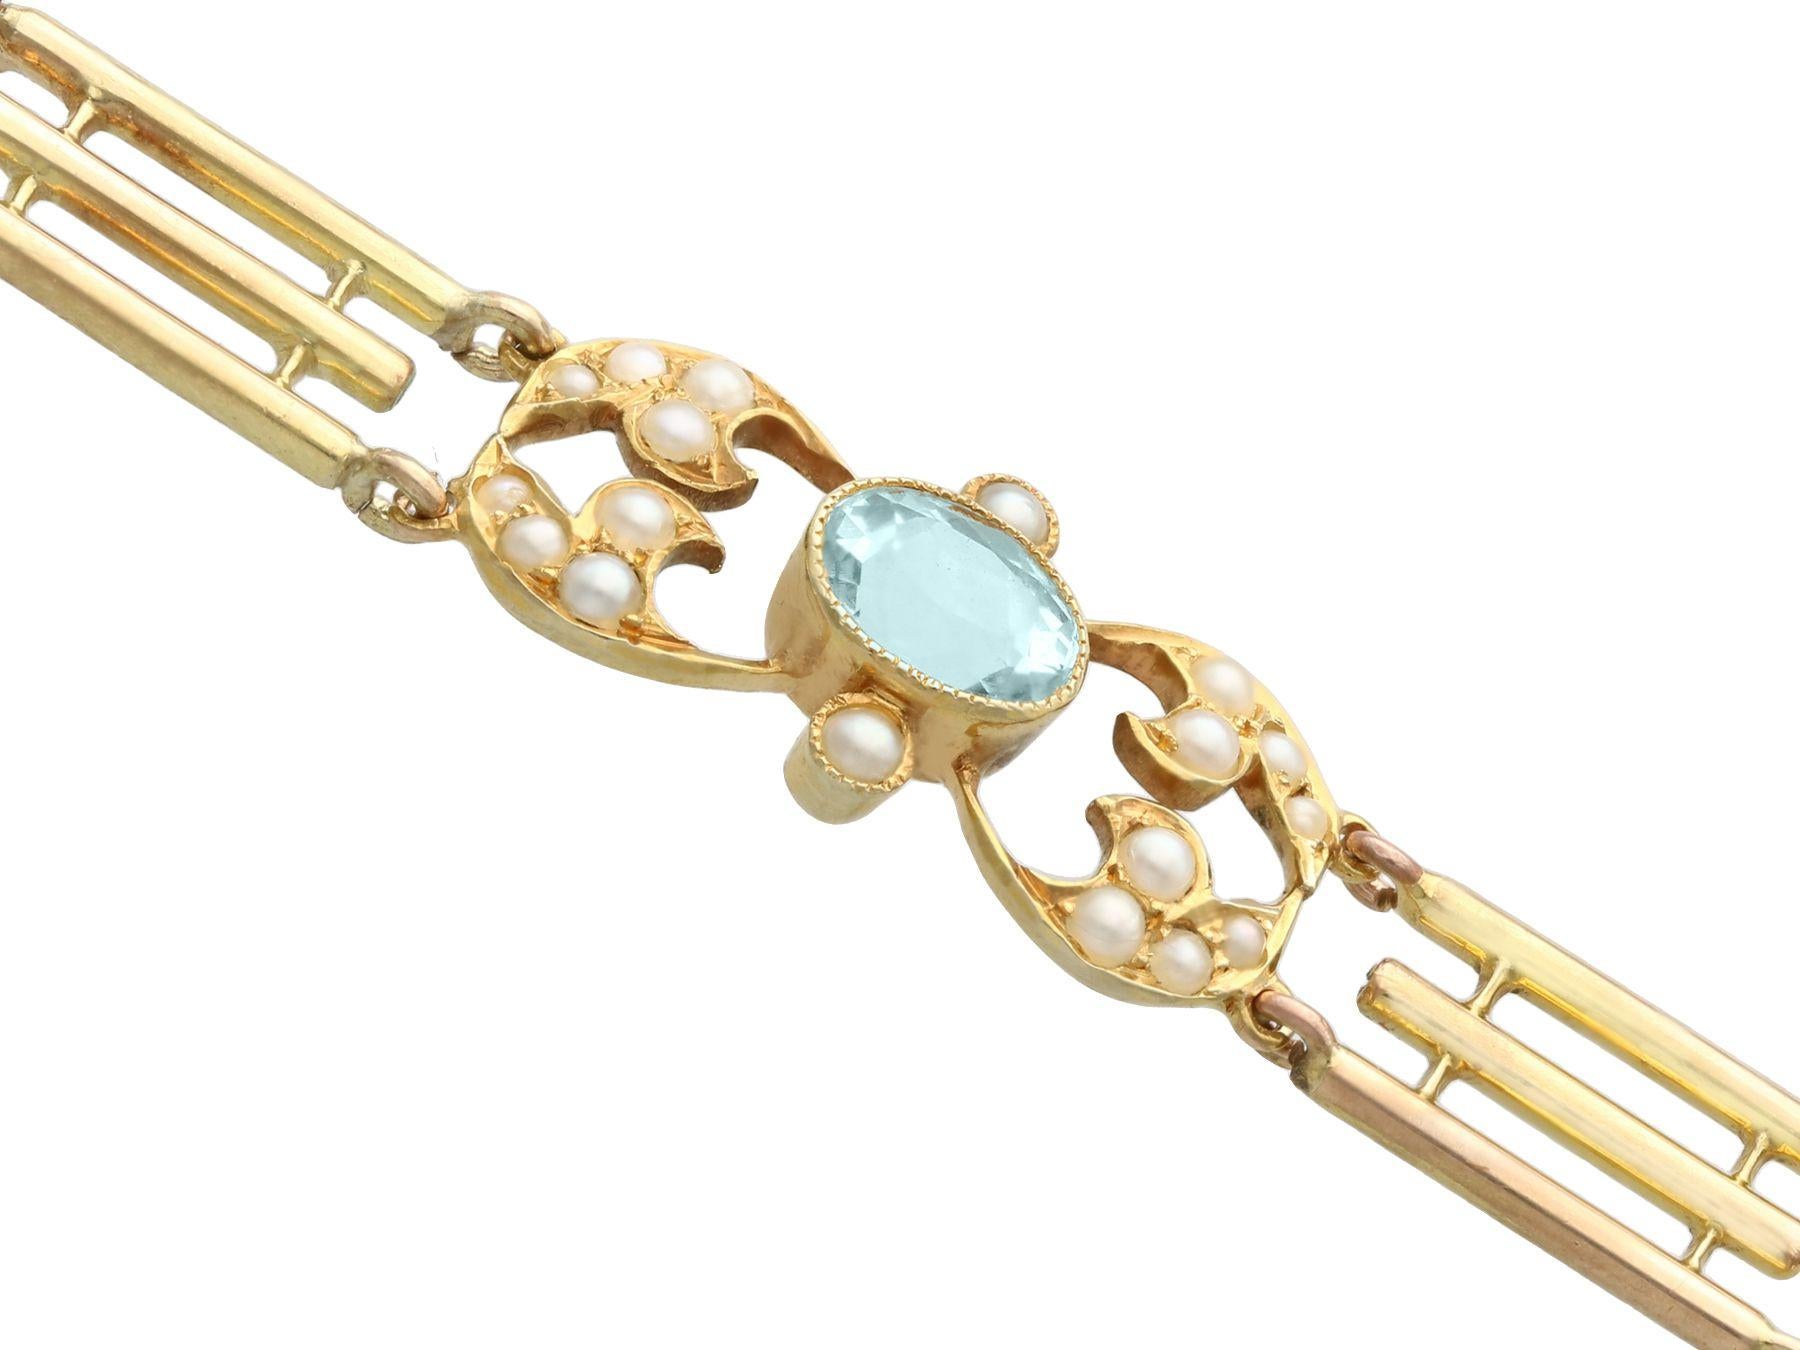 1920s 2.55 Carat Aquamarine and Seed Pearl Yellow Gold Gate Bracelet In Good Condition For Sale In Jesmond, Newcastle Upon Tyne